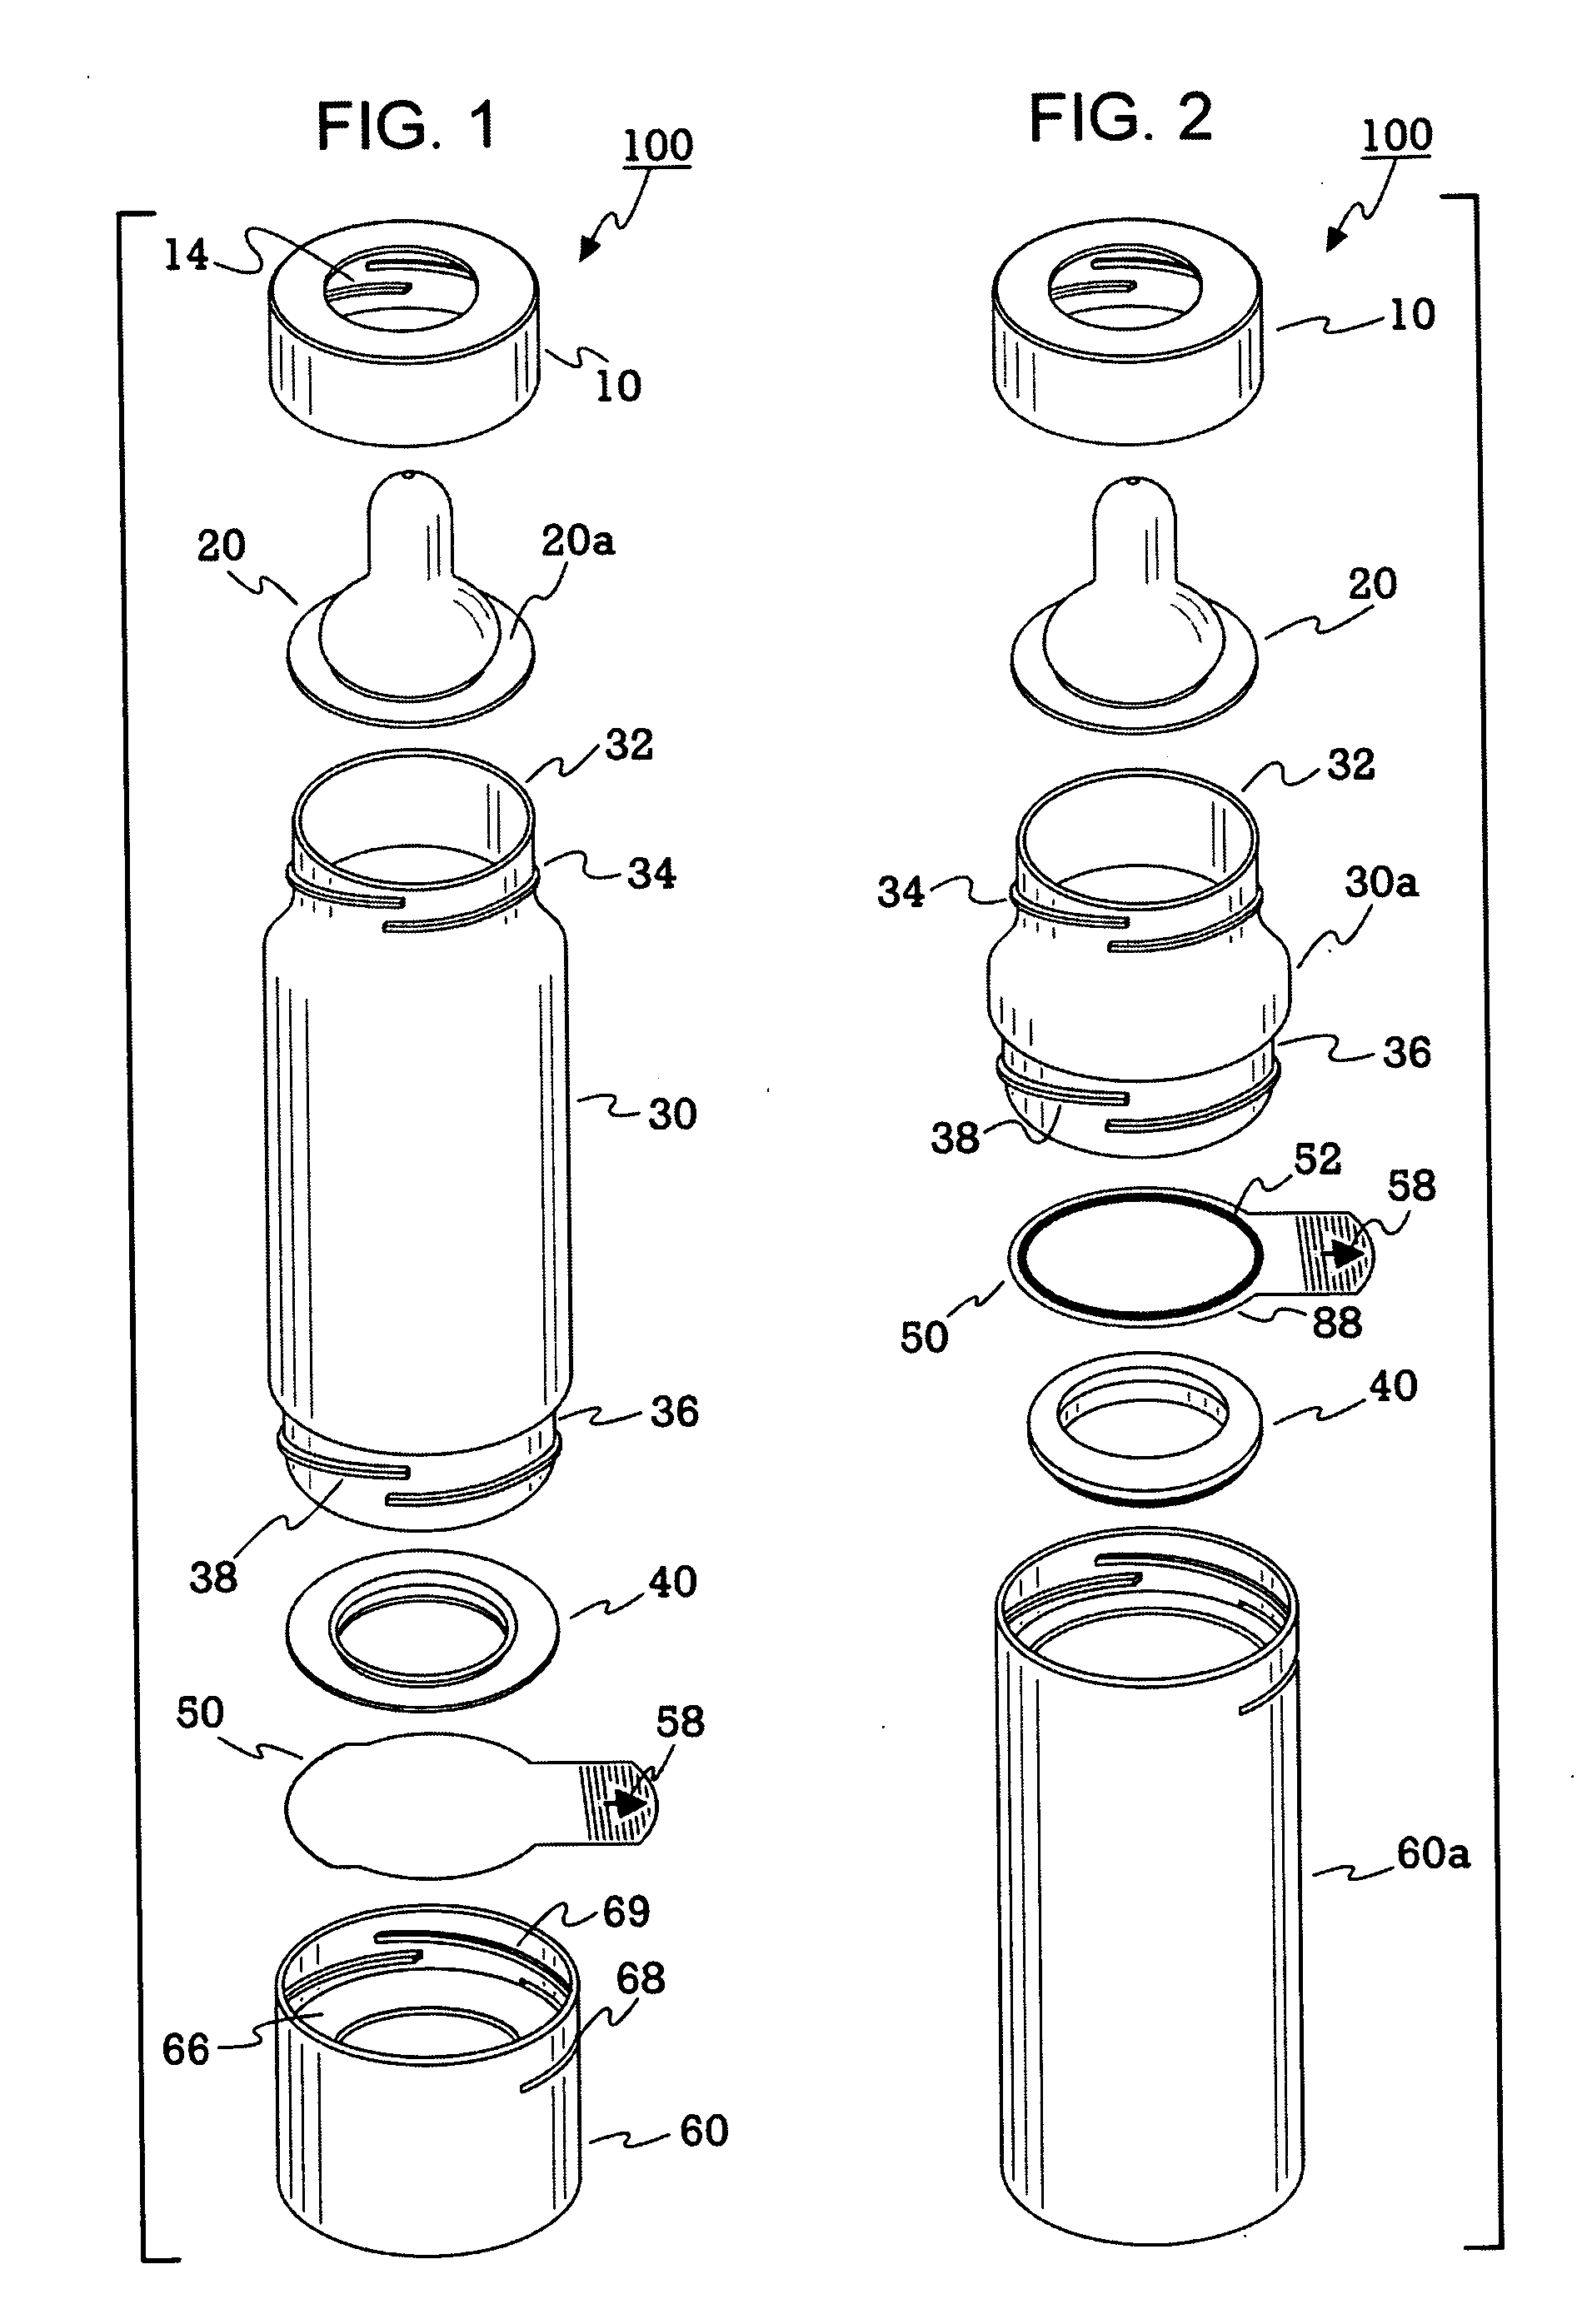 Multi-chambered container for storing and mixing a first and second substance into a composition